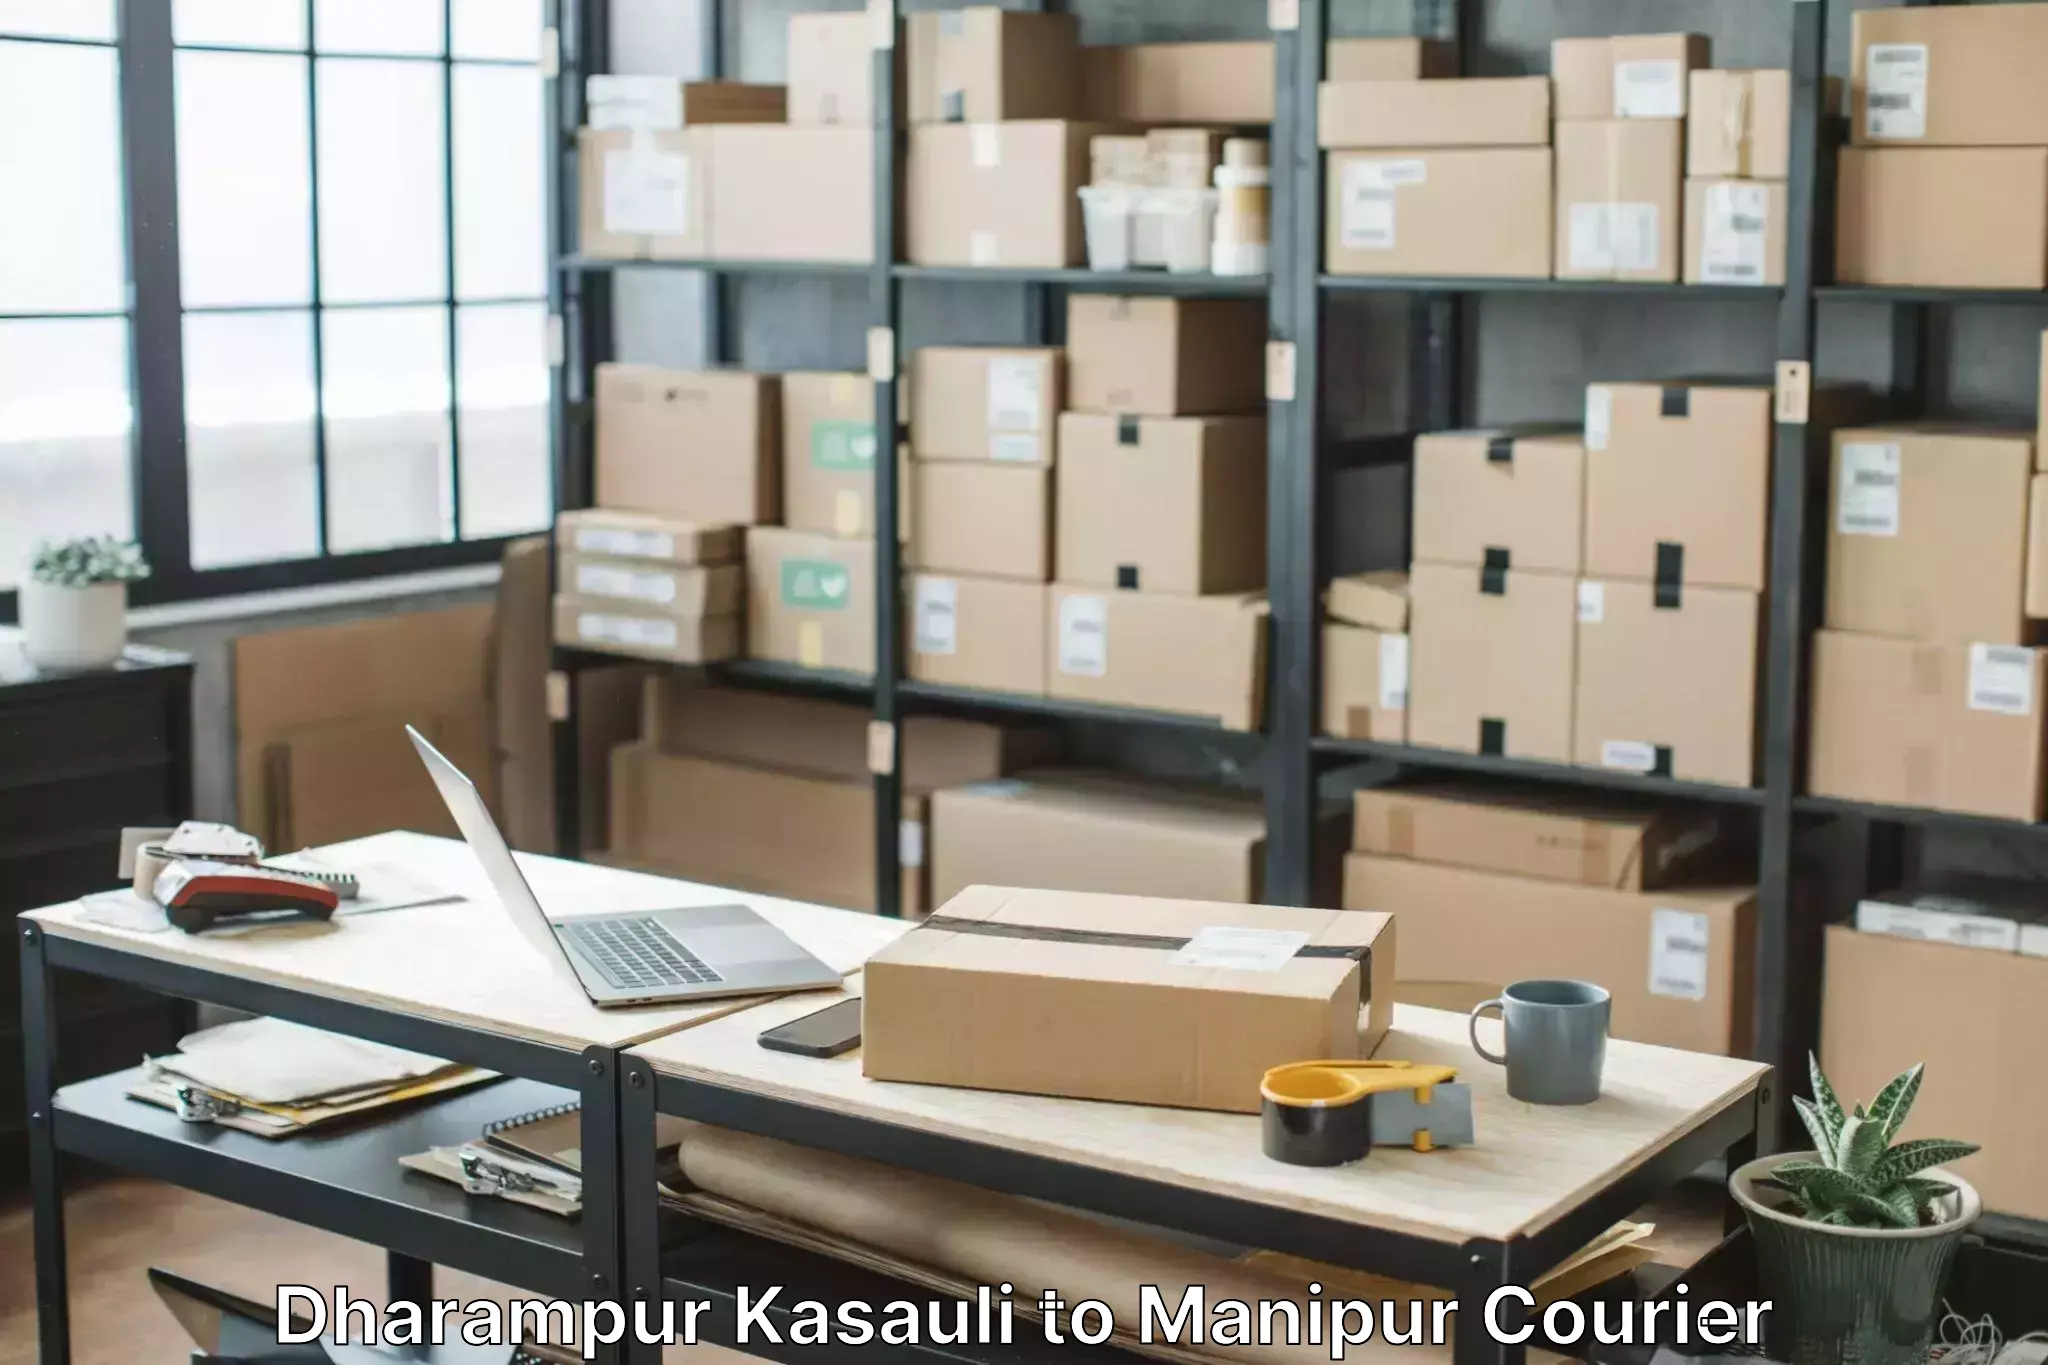 Budget-friendly moving services Dharampur Kasauli to Manipur